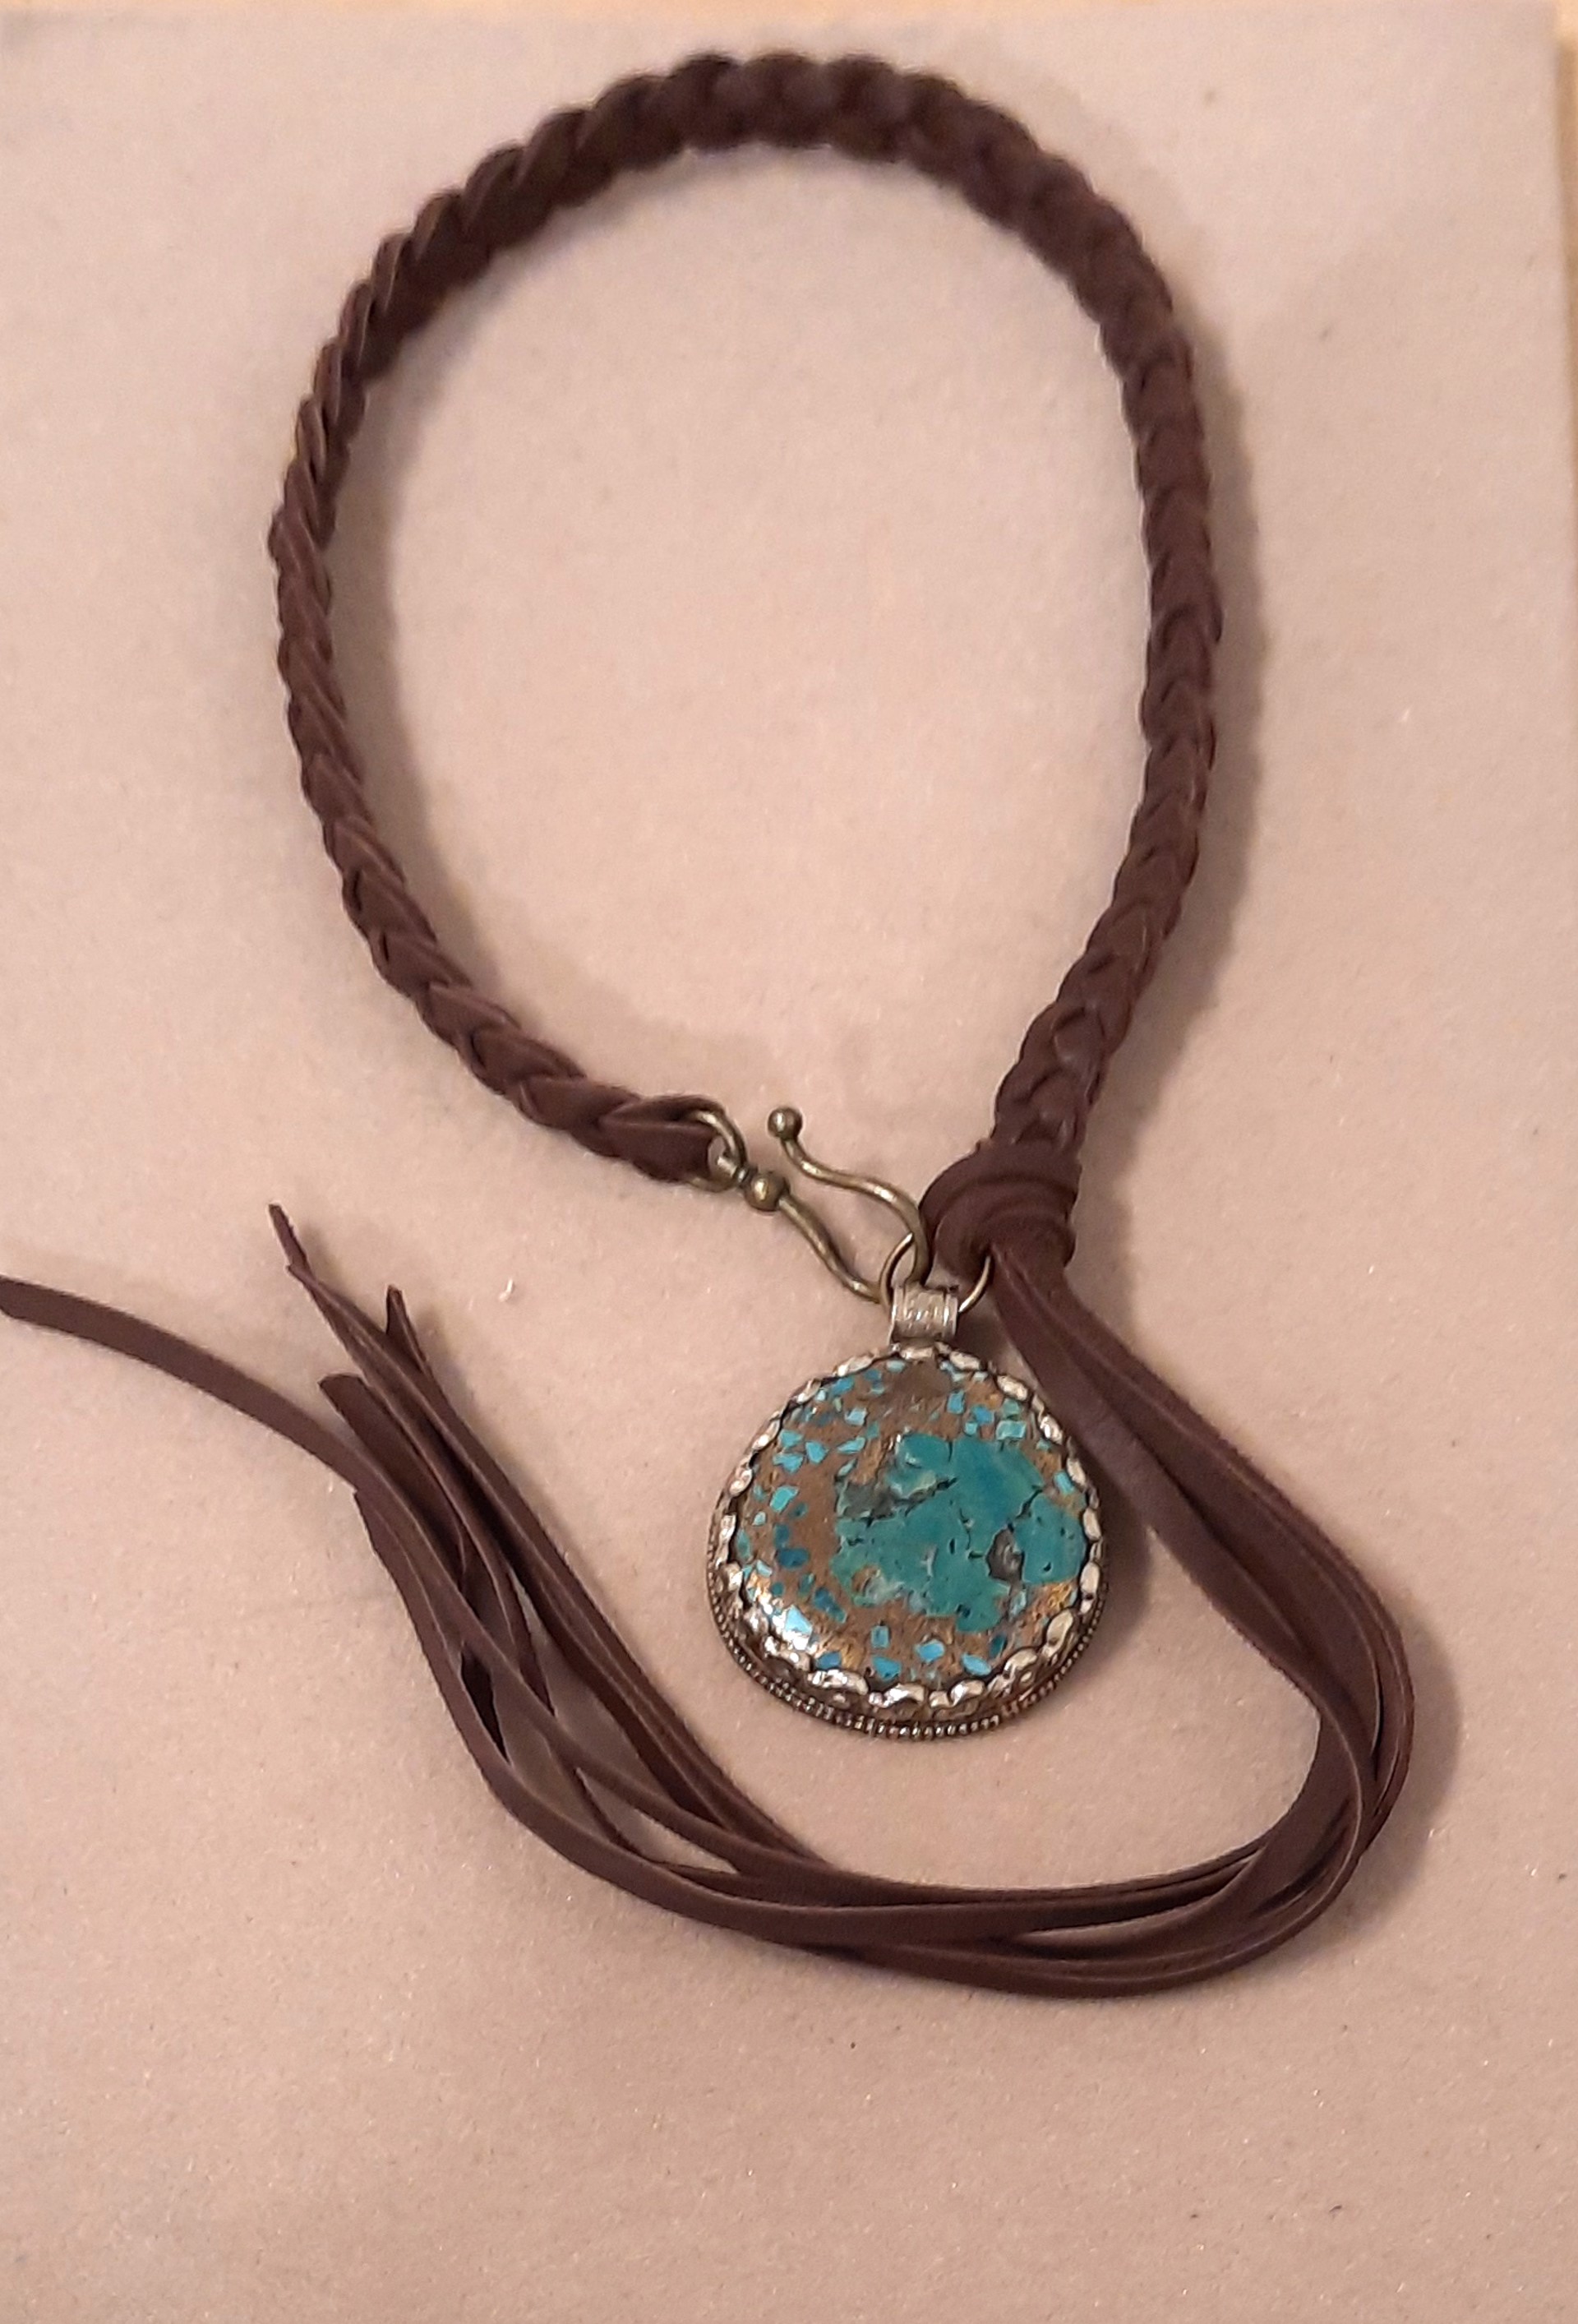 Braided Leather Turquoise1 by Melissa Turney